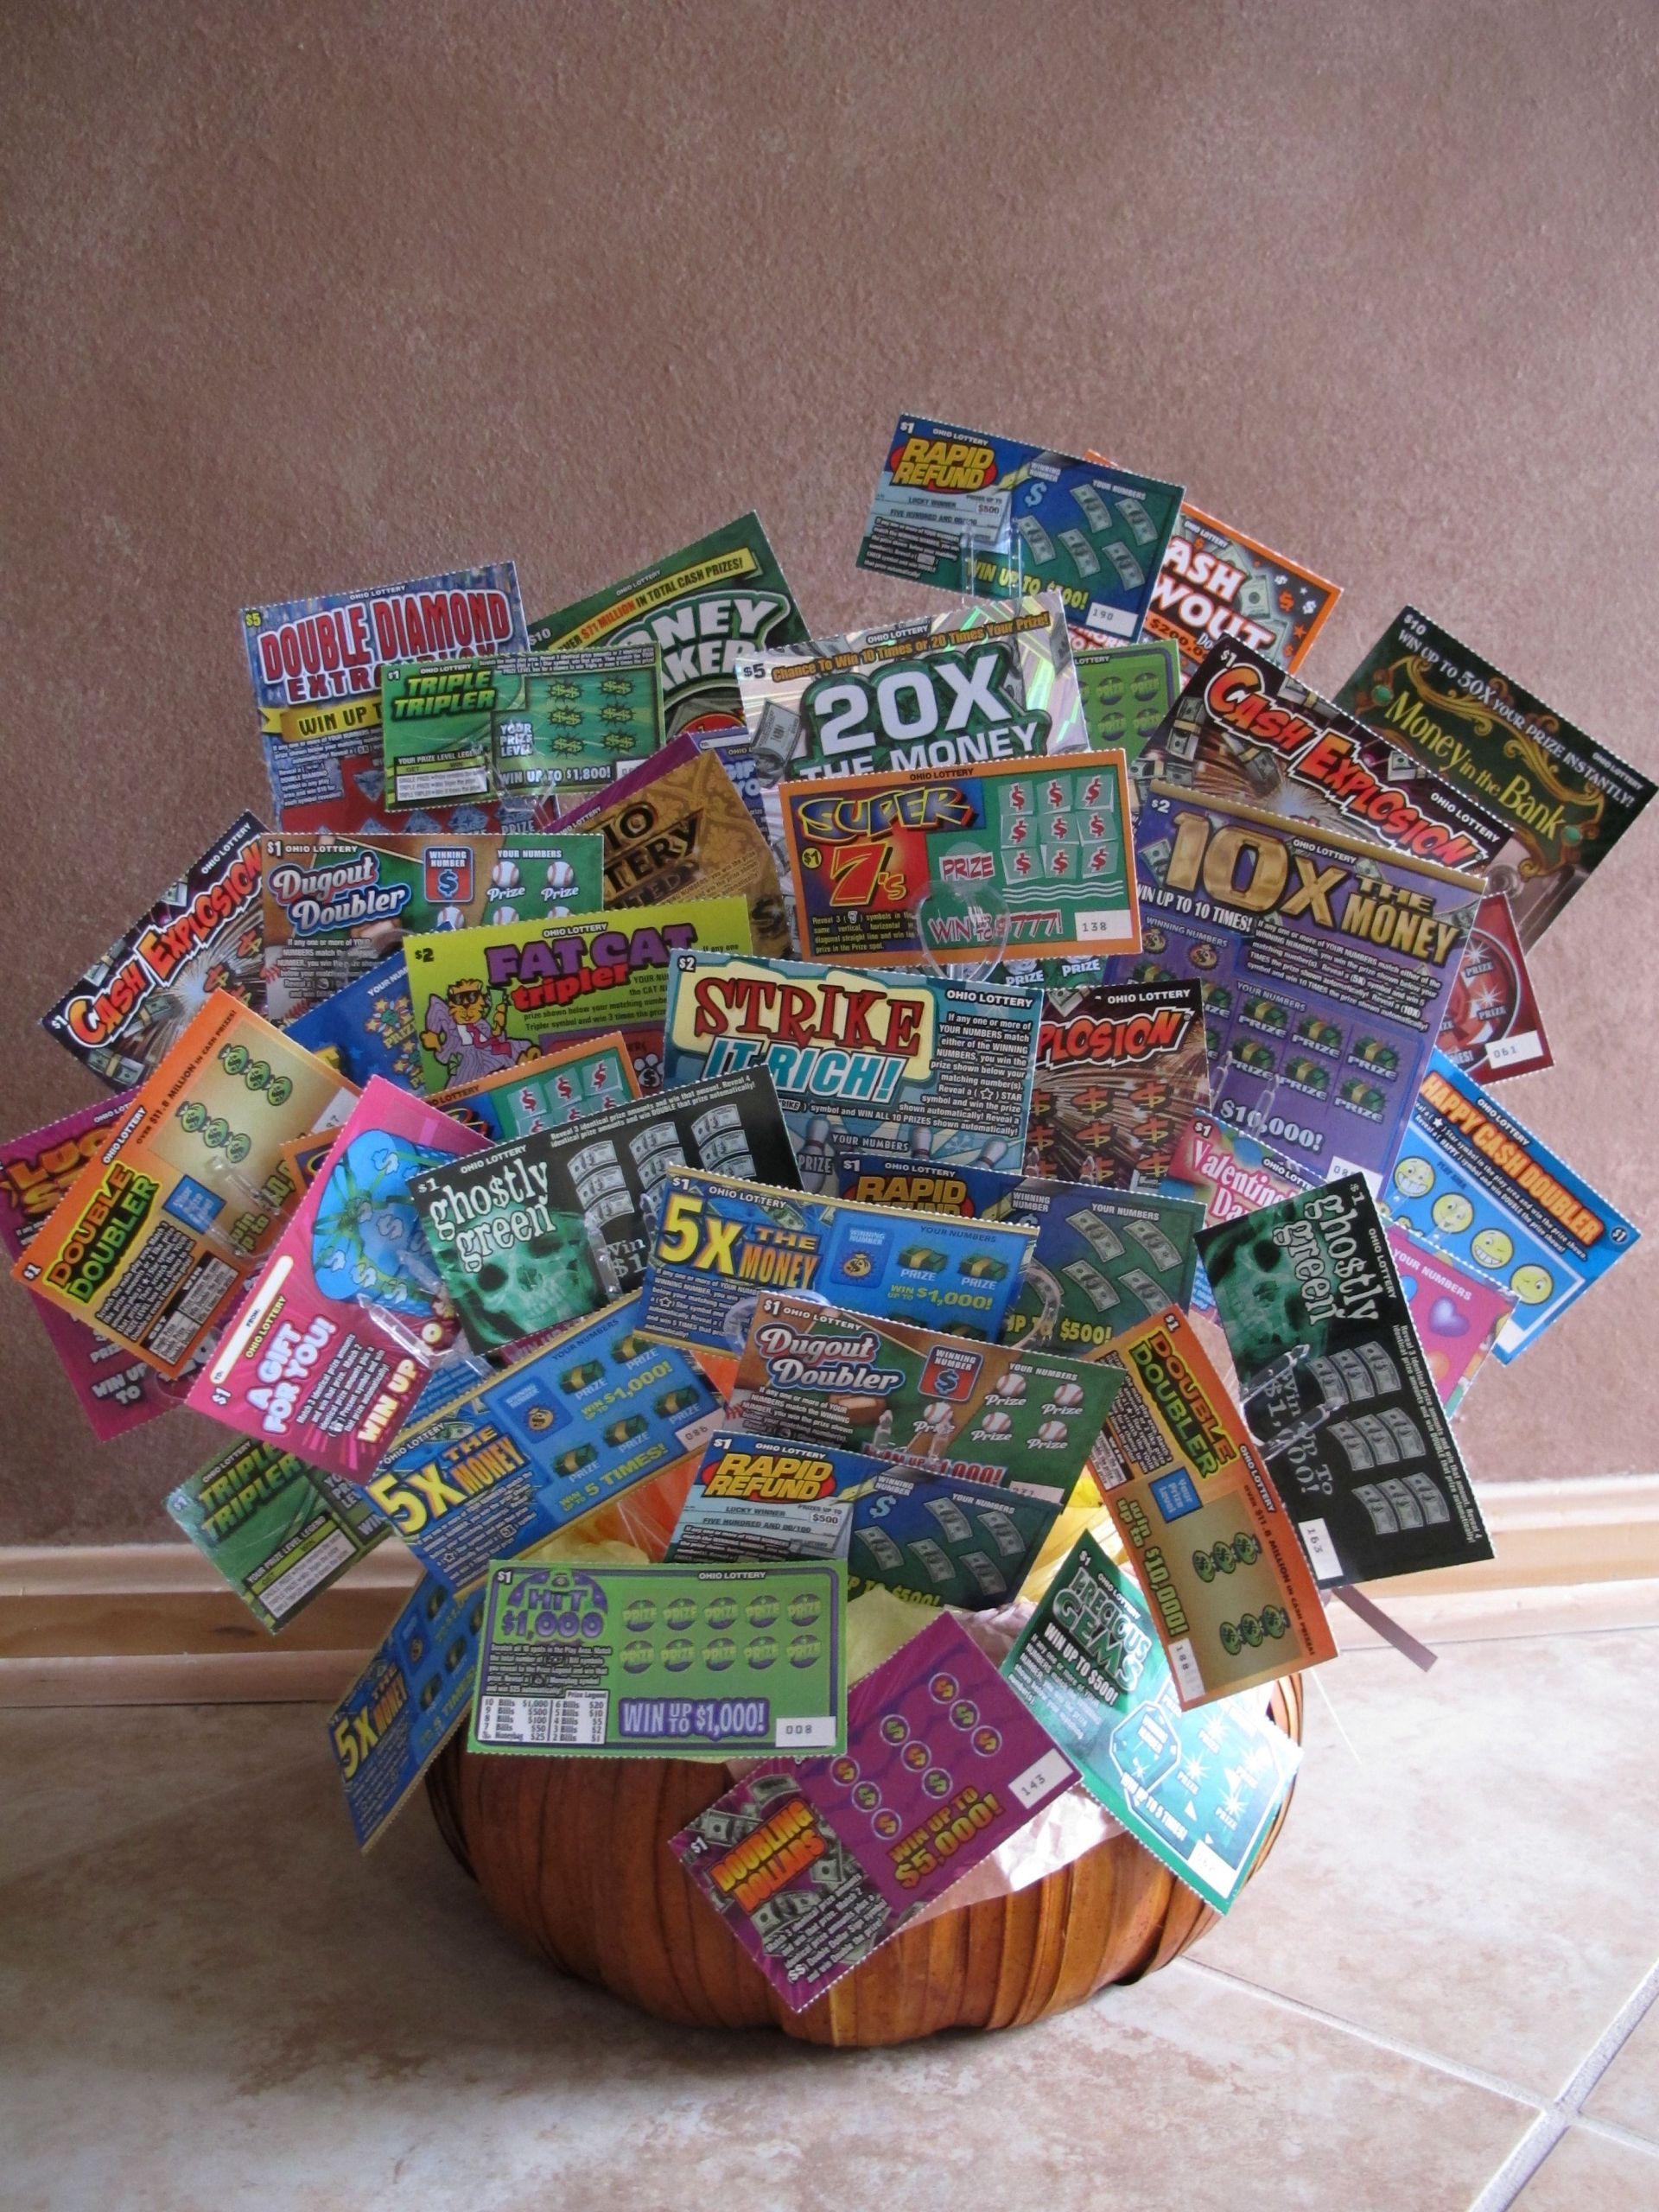 Lottery Ticket Gift Basket Ideas
 $100 00 Illinois Lottery Instant Ticket Basket just one of